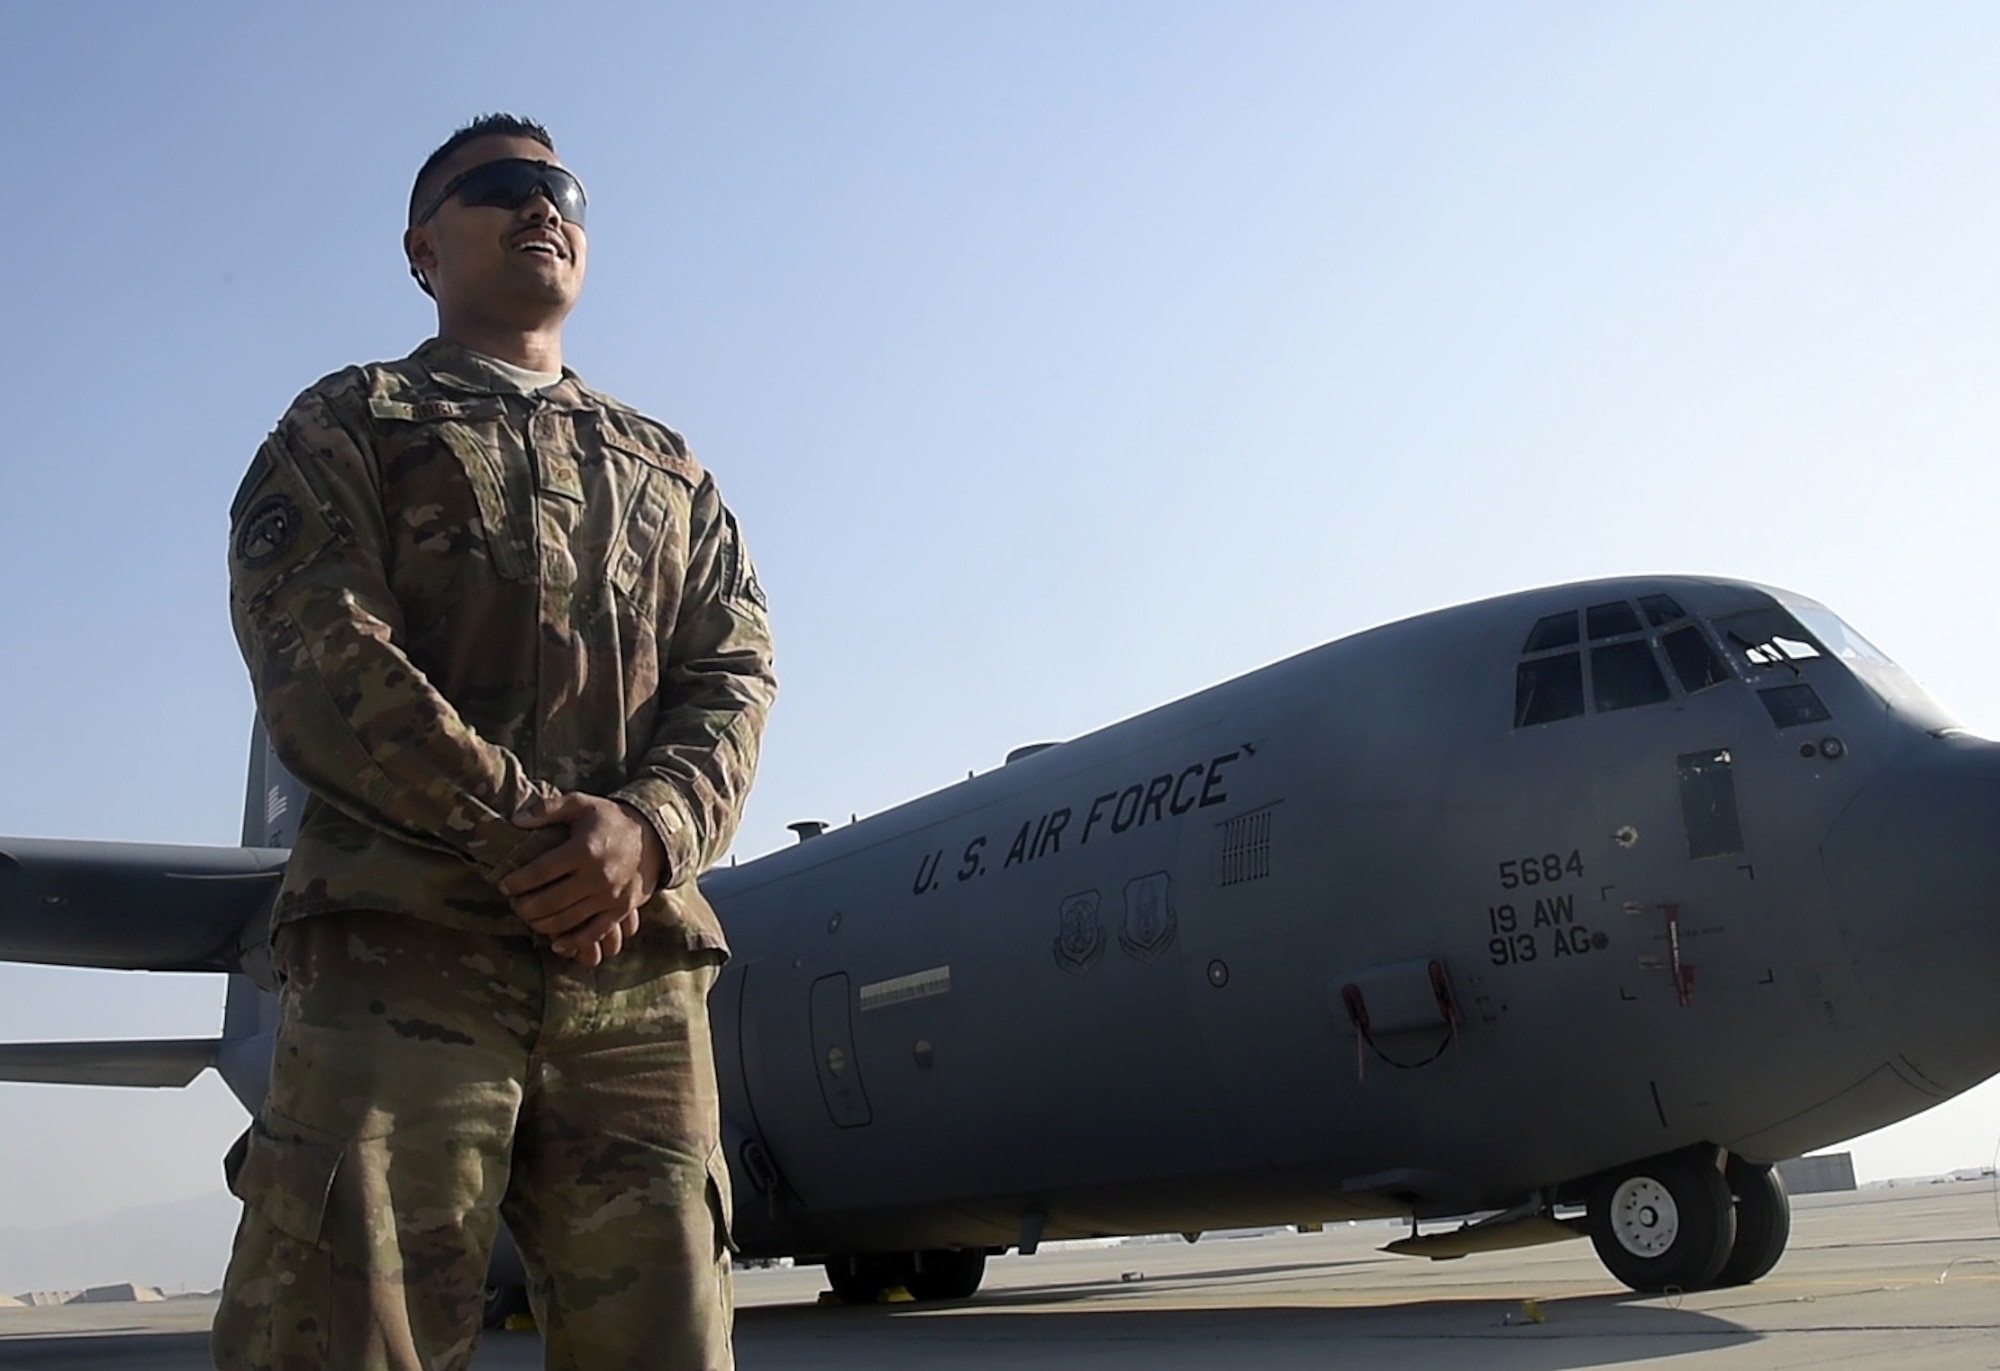 Staff Sgt. Anthony Single, 455th Expeditionary Aircraft Maintenance Squadron crew chief, poses for a photo Dec. 5, 2017 at Bagram Airfield, Afghanistan.